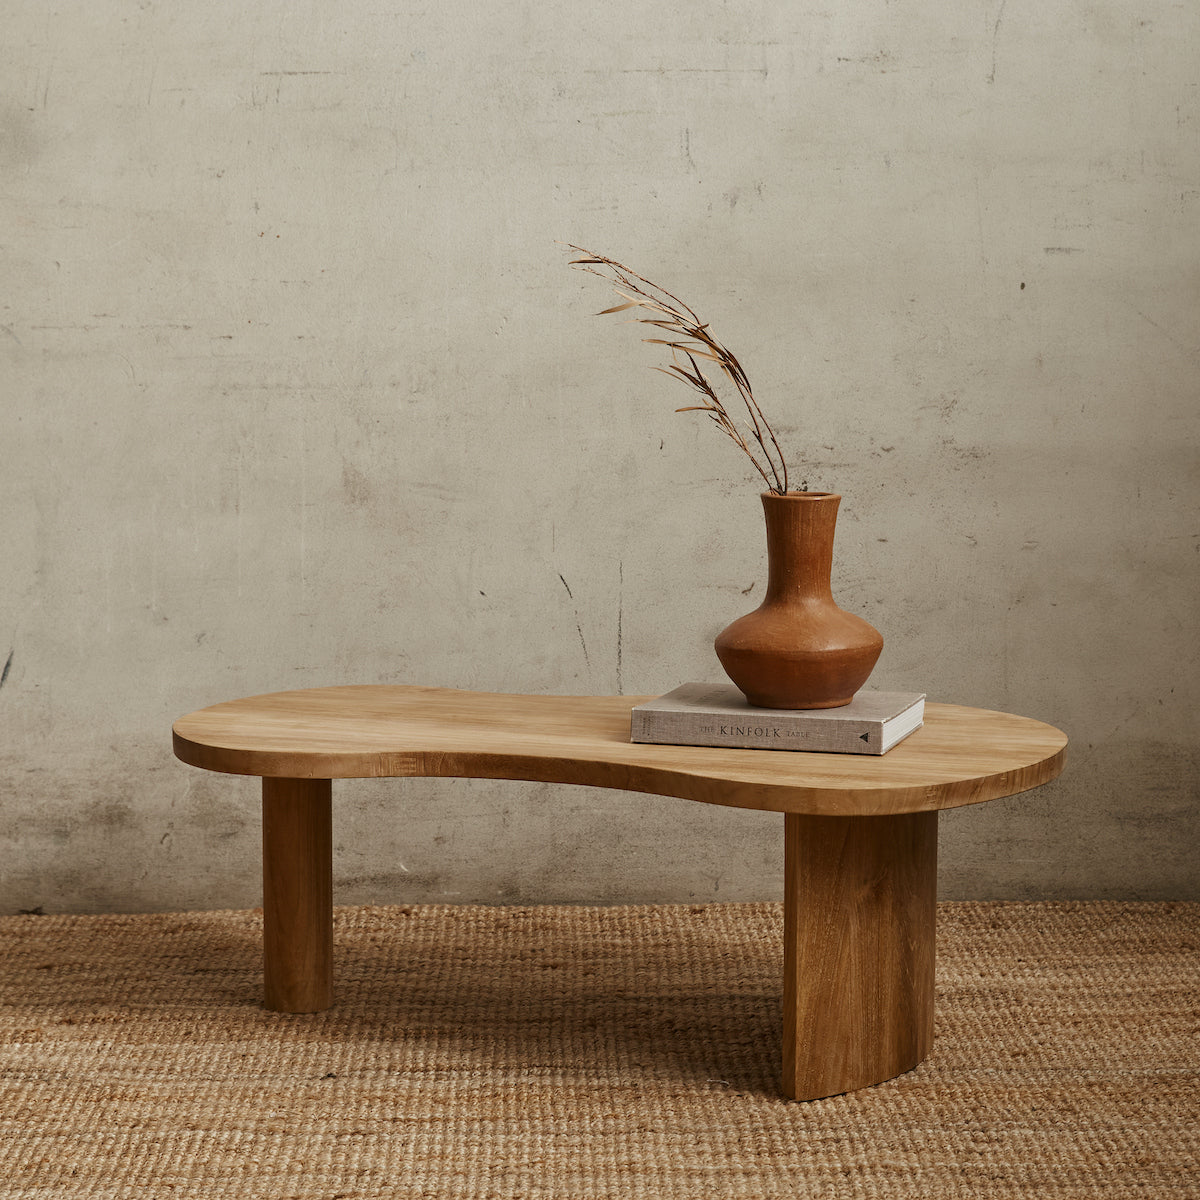 Solomon Curved Table